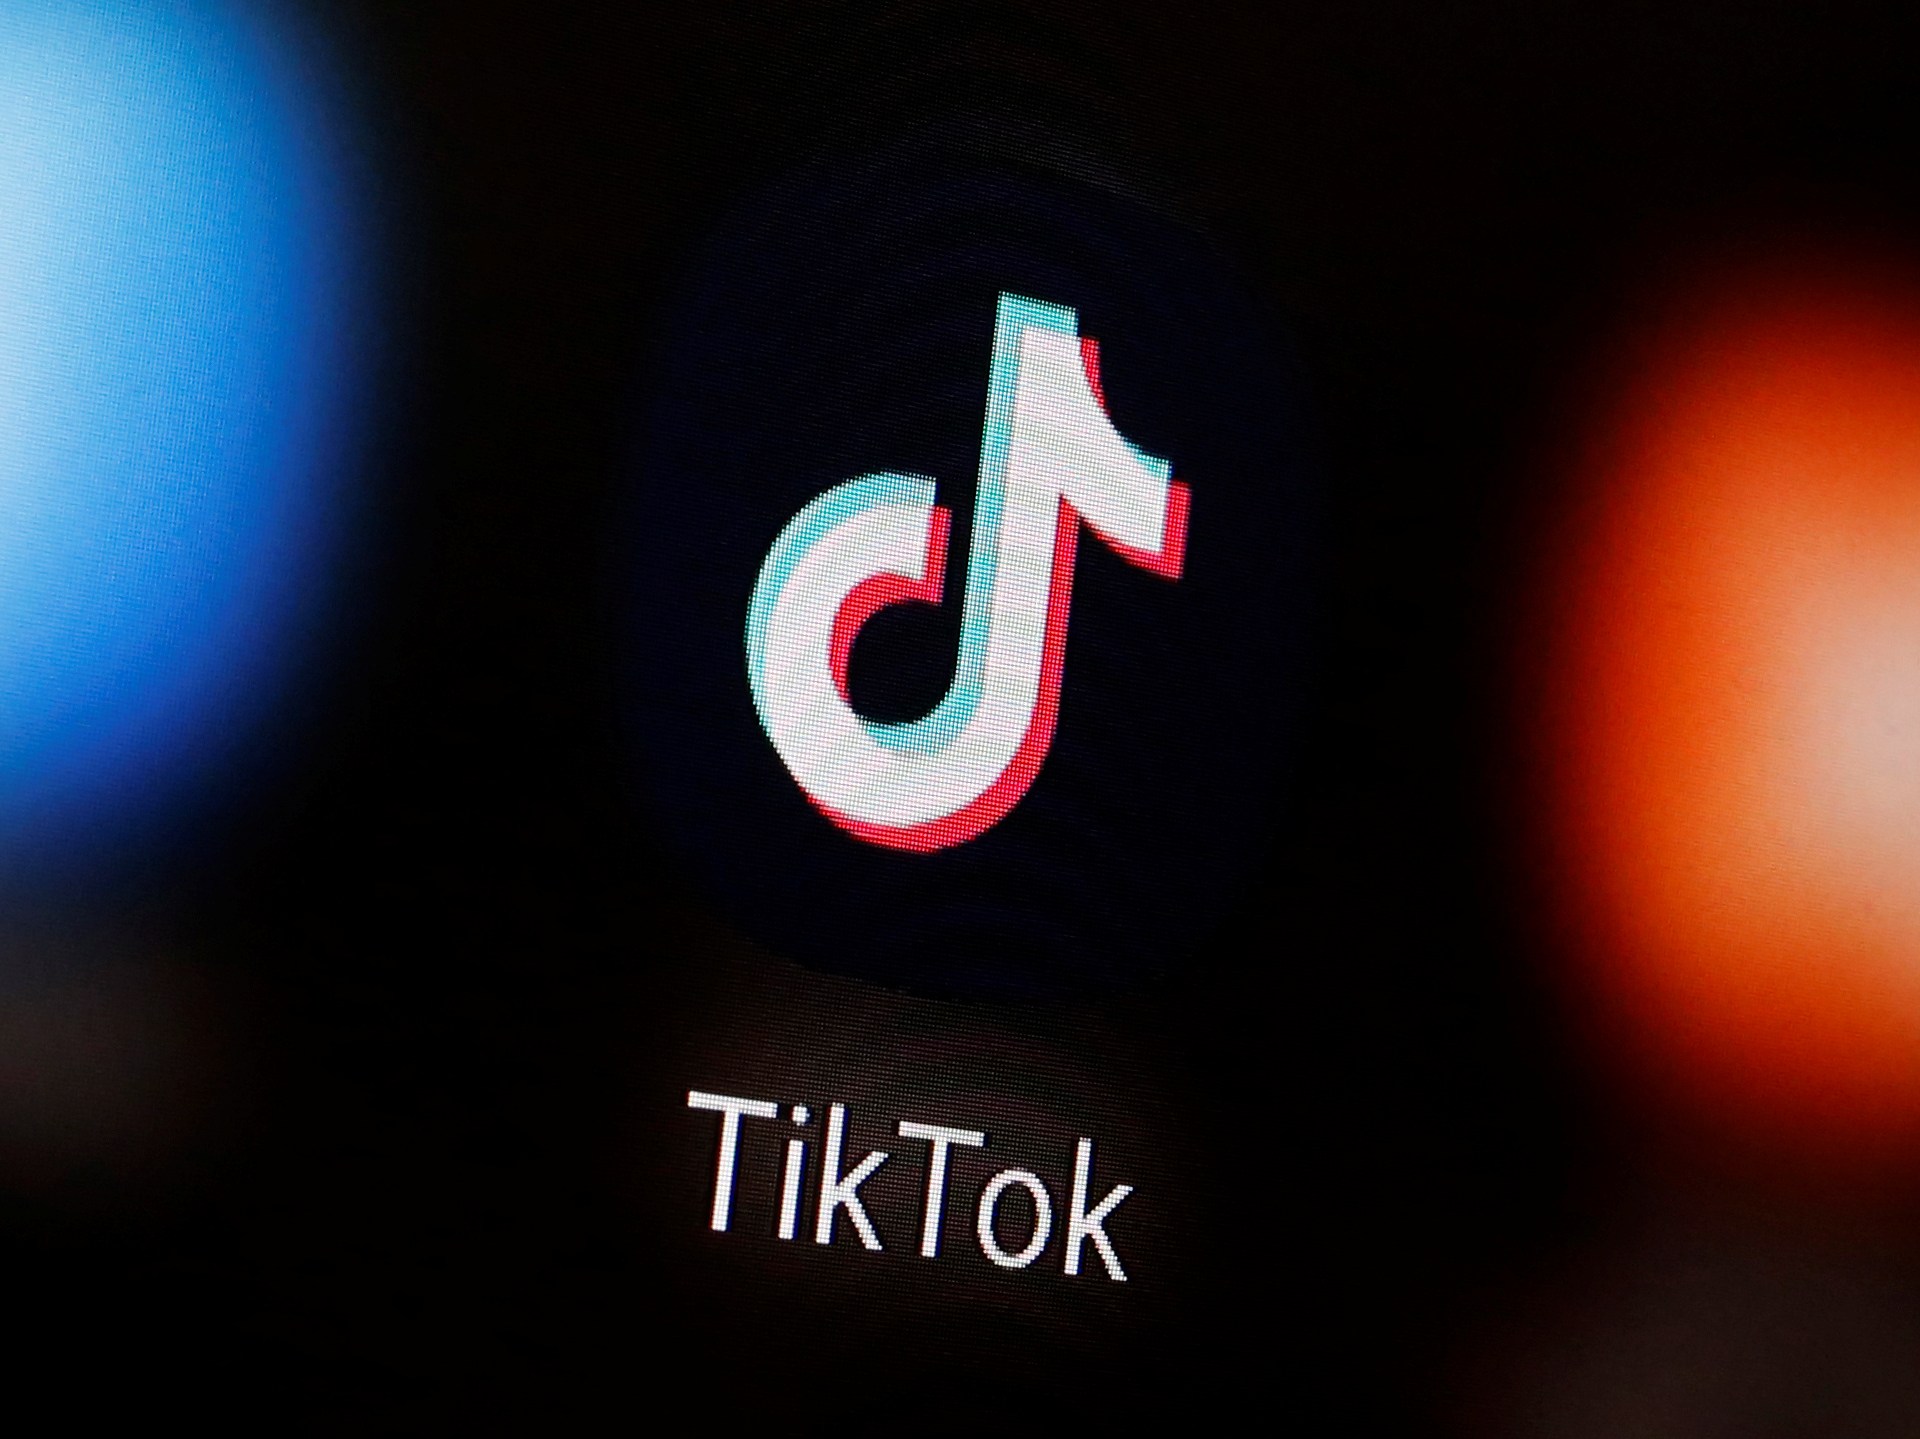 Will the 2024 US election save TikTok from near-death? | Social Media News